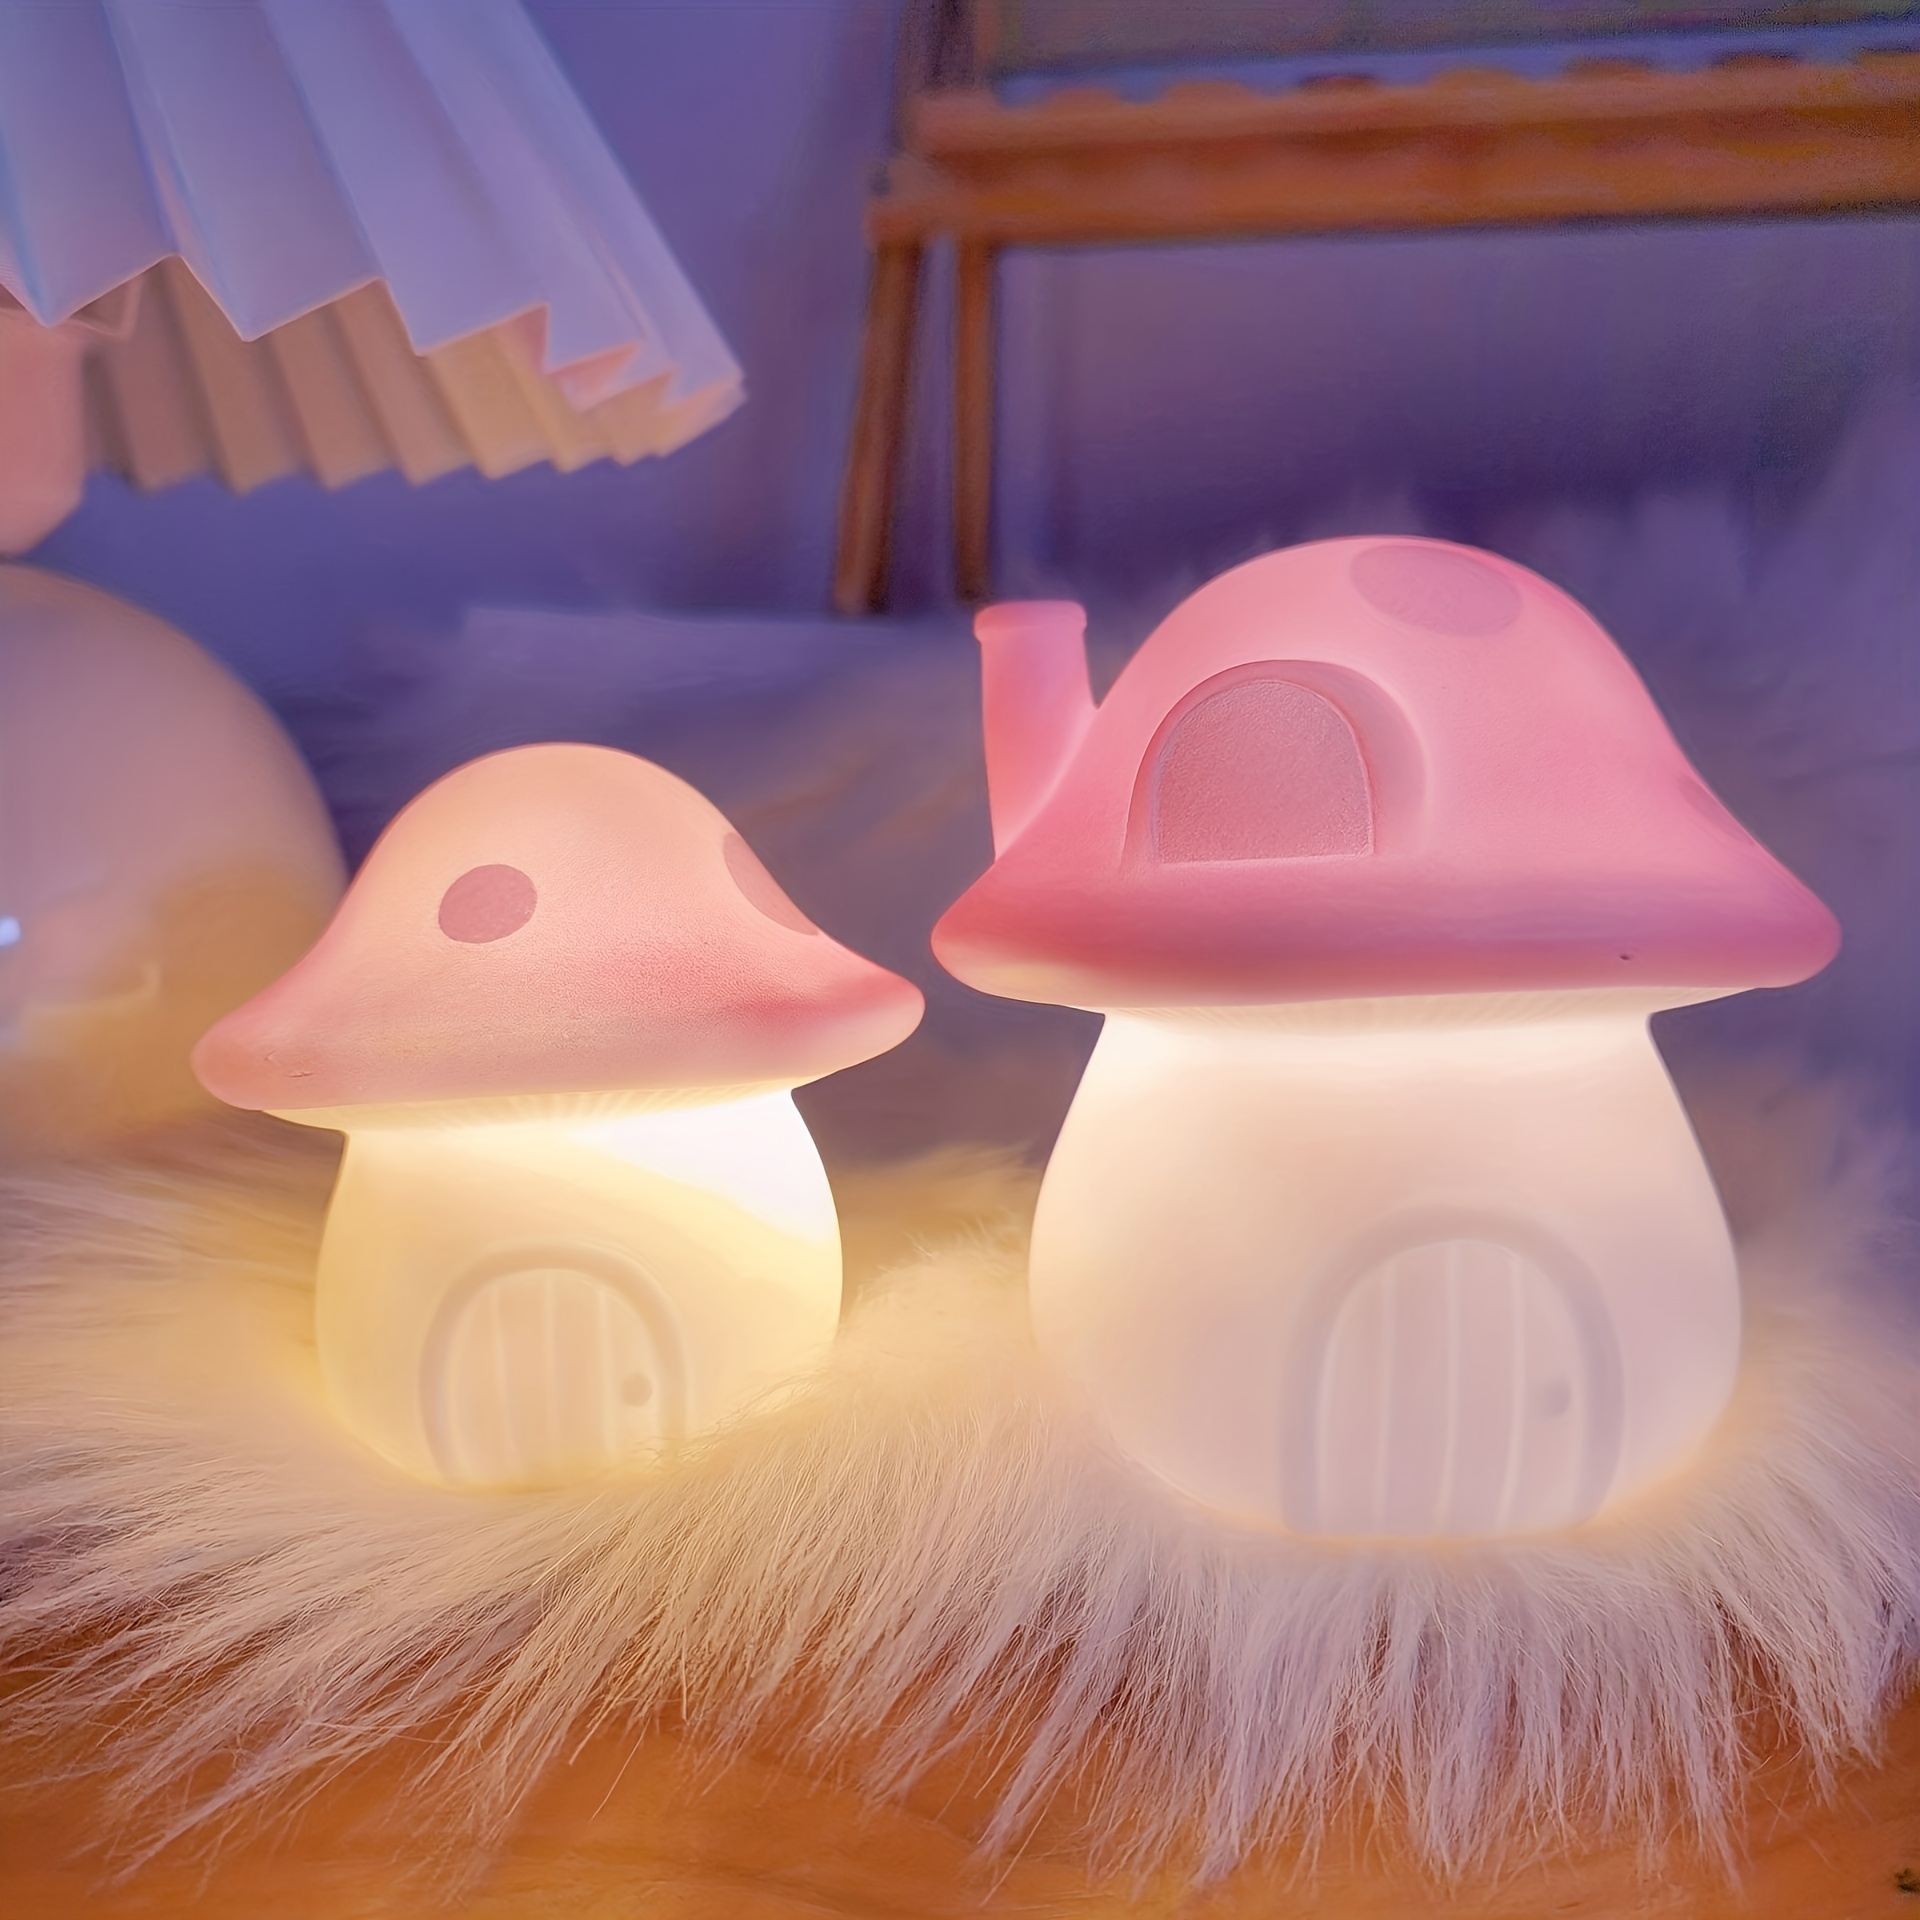 Add a Magical Touch to Your Room with this Mushroom Night Light!